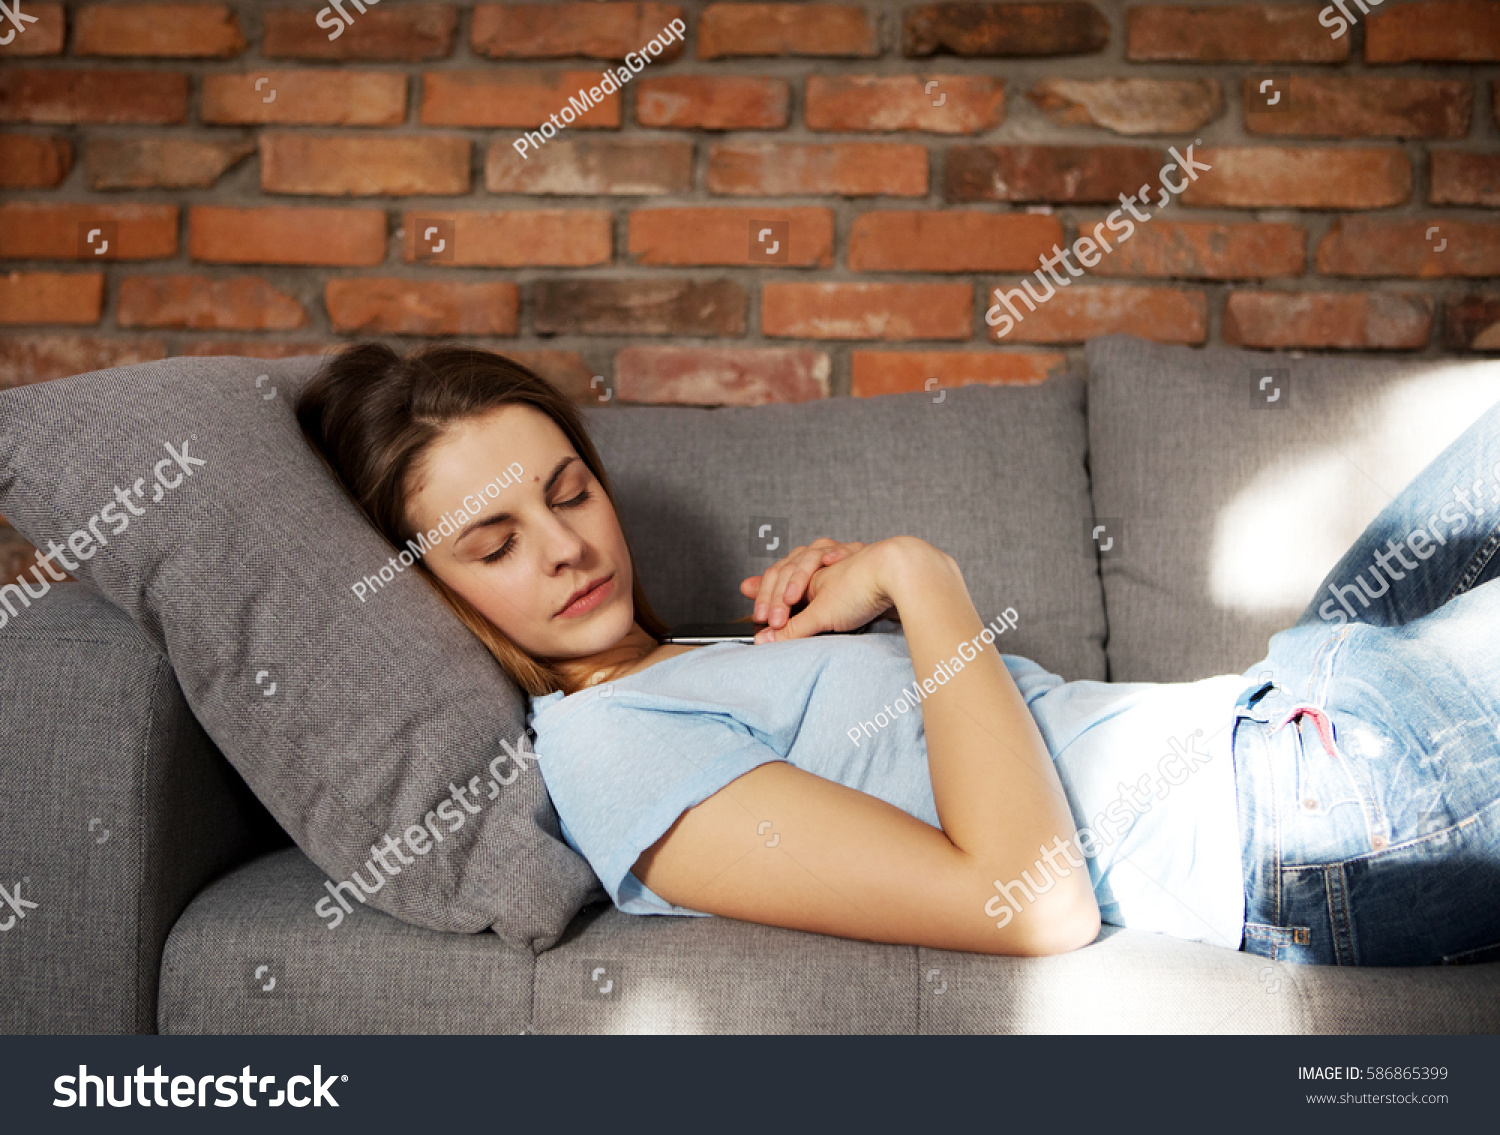 Beautiful Young Woman Sleeping On Couch Foto Stock 586865399 Shutterstock